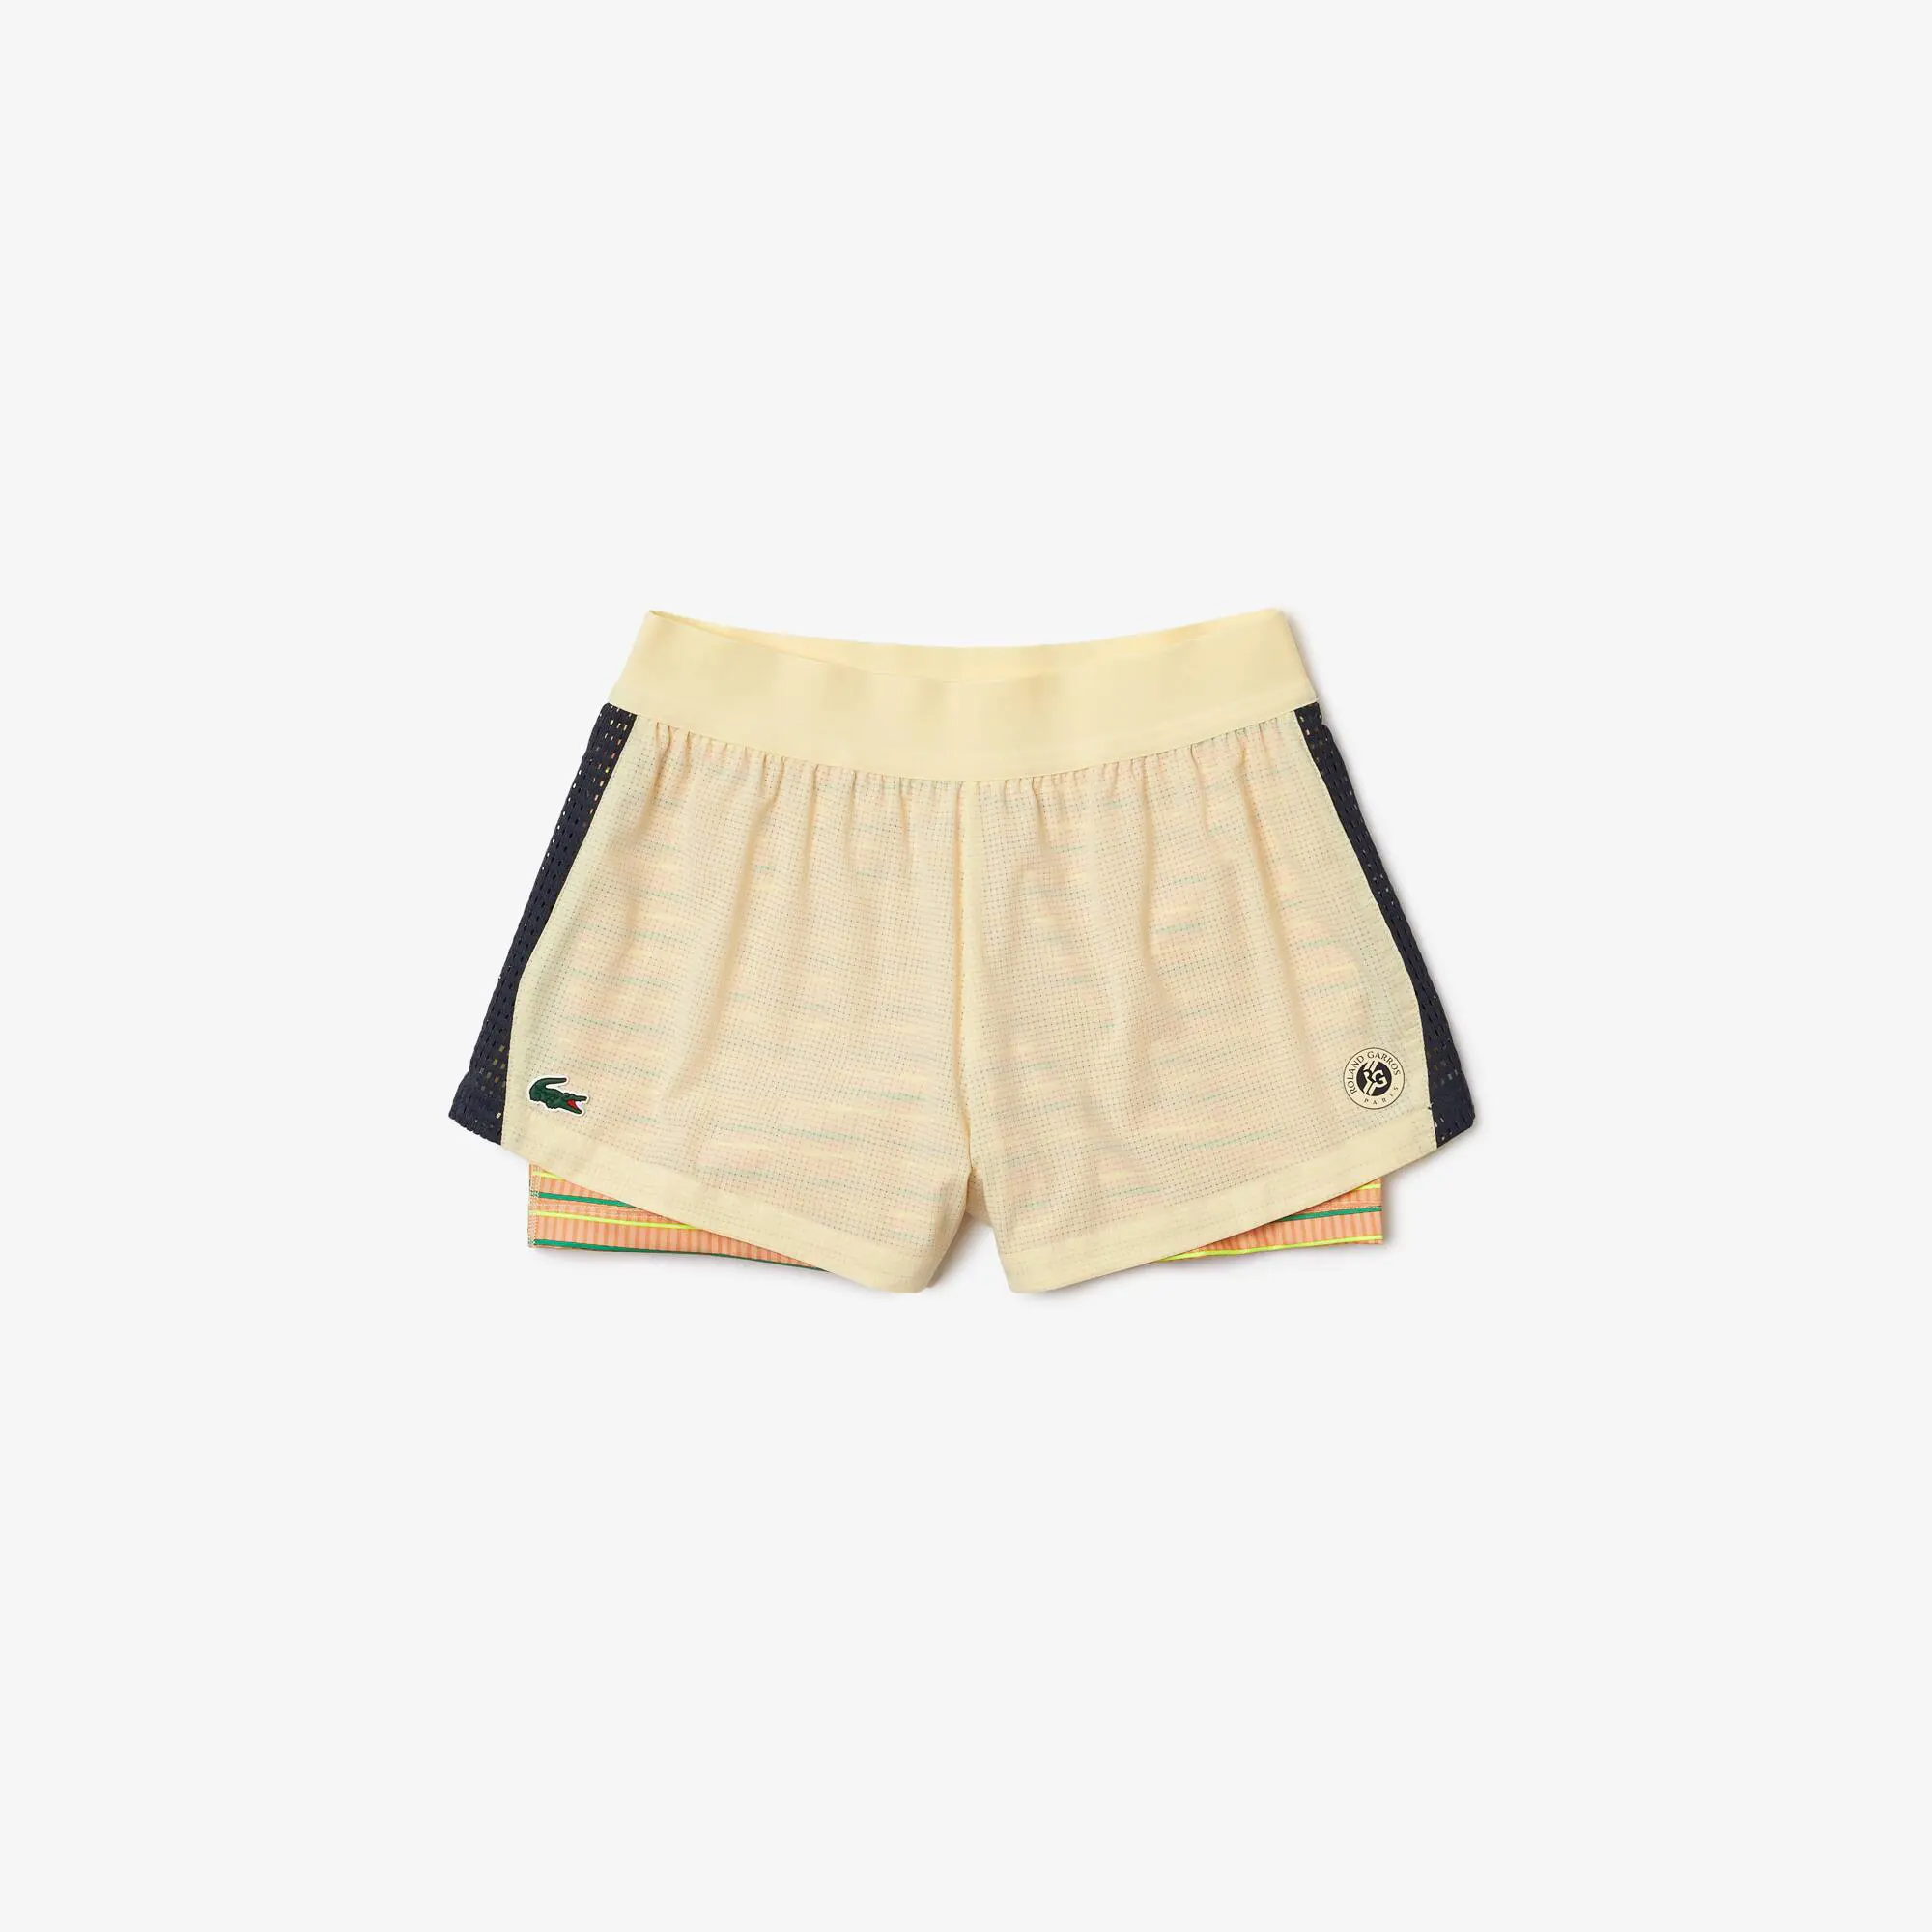 Lacoste Women’s Roland Garros Edition Sport Shorts with Built-in Undershorts. 2